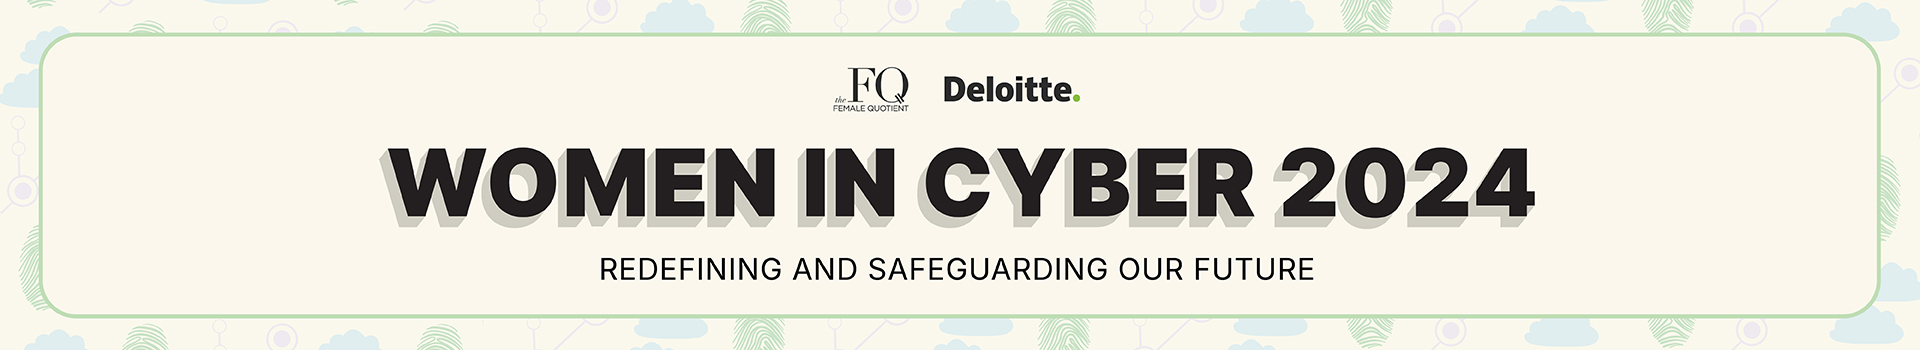 Women in Cyber 2024: Redefining And Safeguarding Our Future